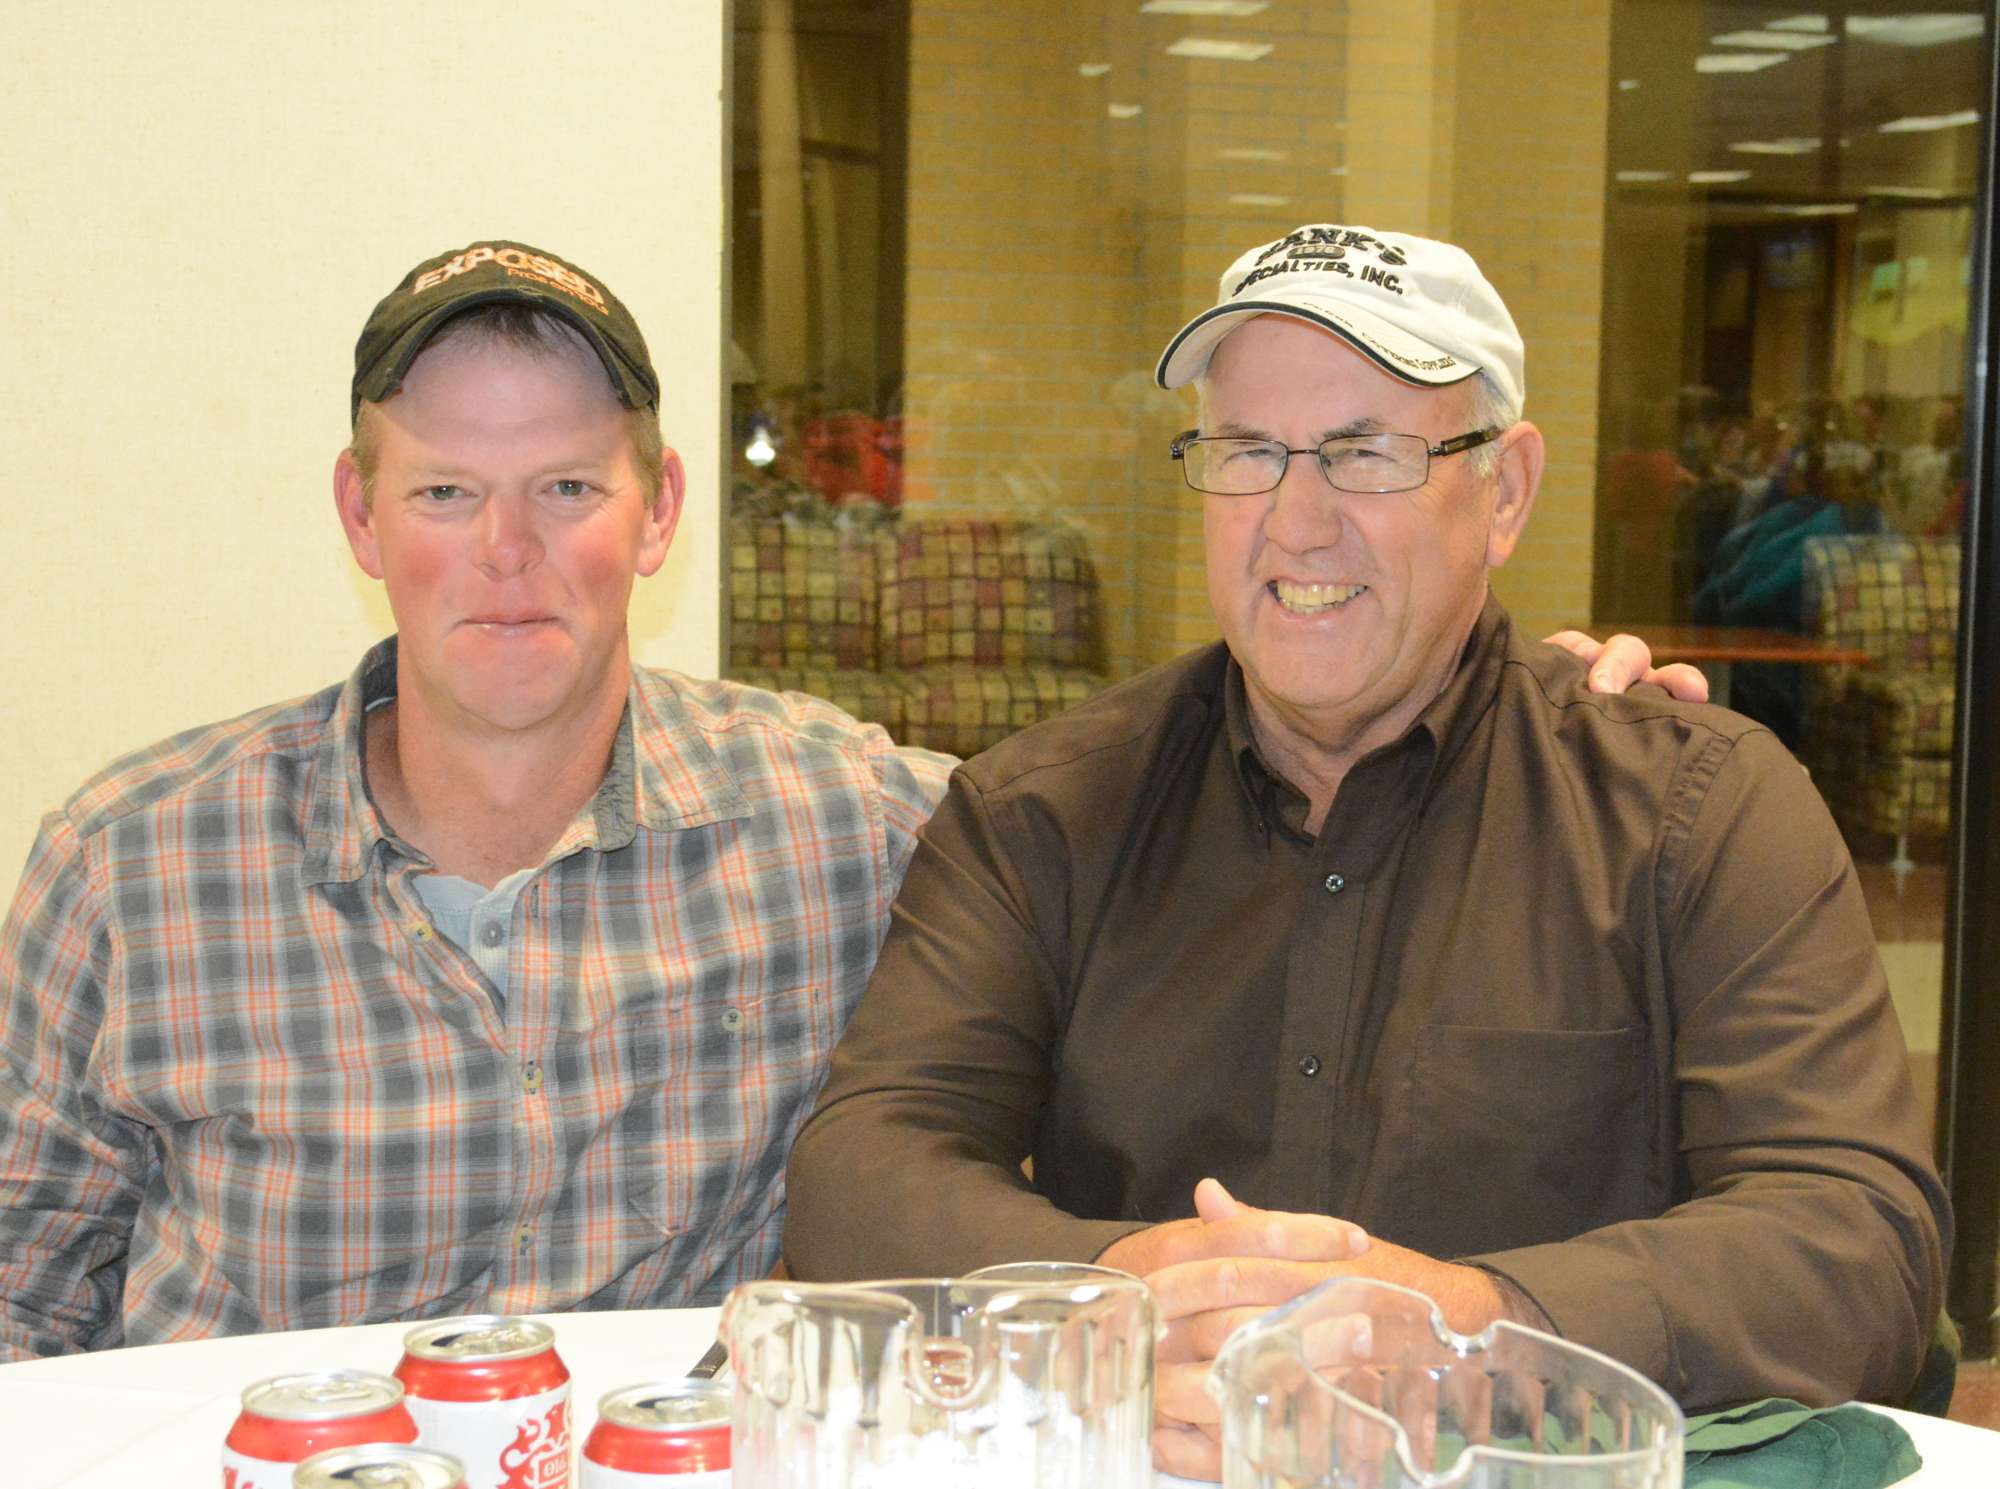 A banquet after the Day 3 weigh-in capped off the 2015 Old Milwaukee B.A.S.S. Nation Championship. With the pressure off, everyone could relax, like South Dakota's Jami Fralick and his dad, Monty Fralick.